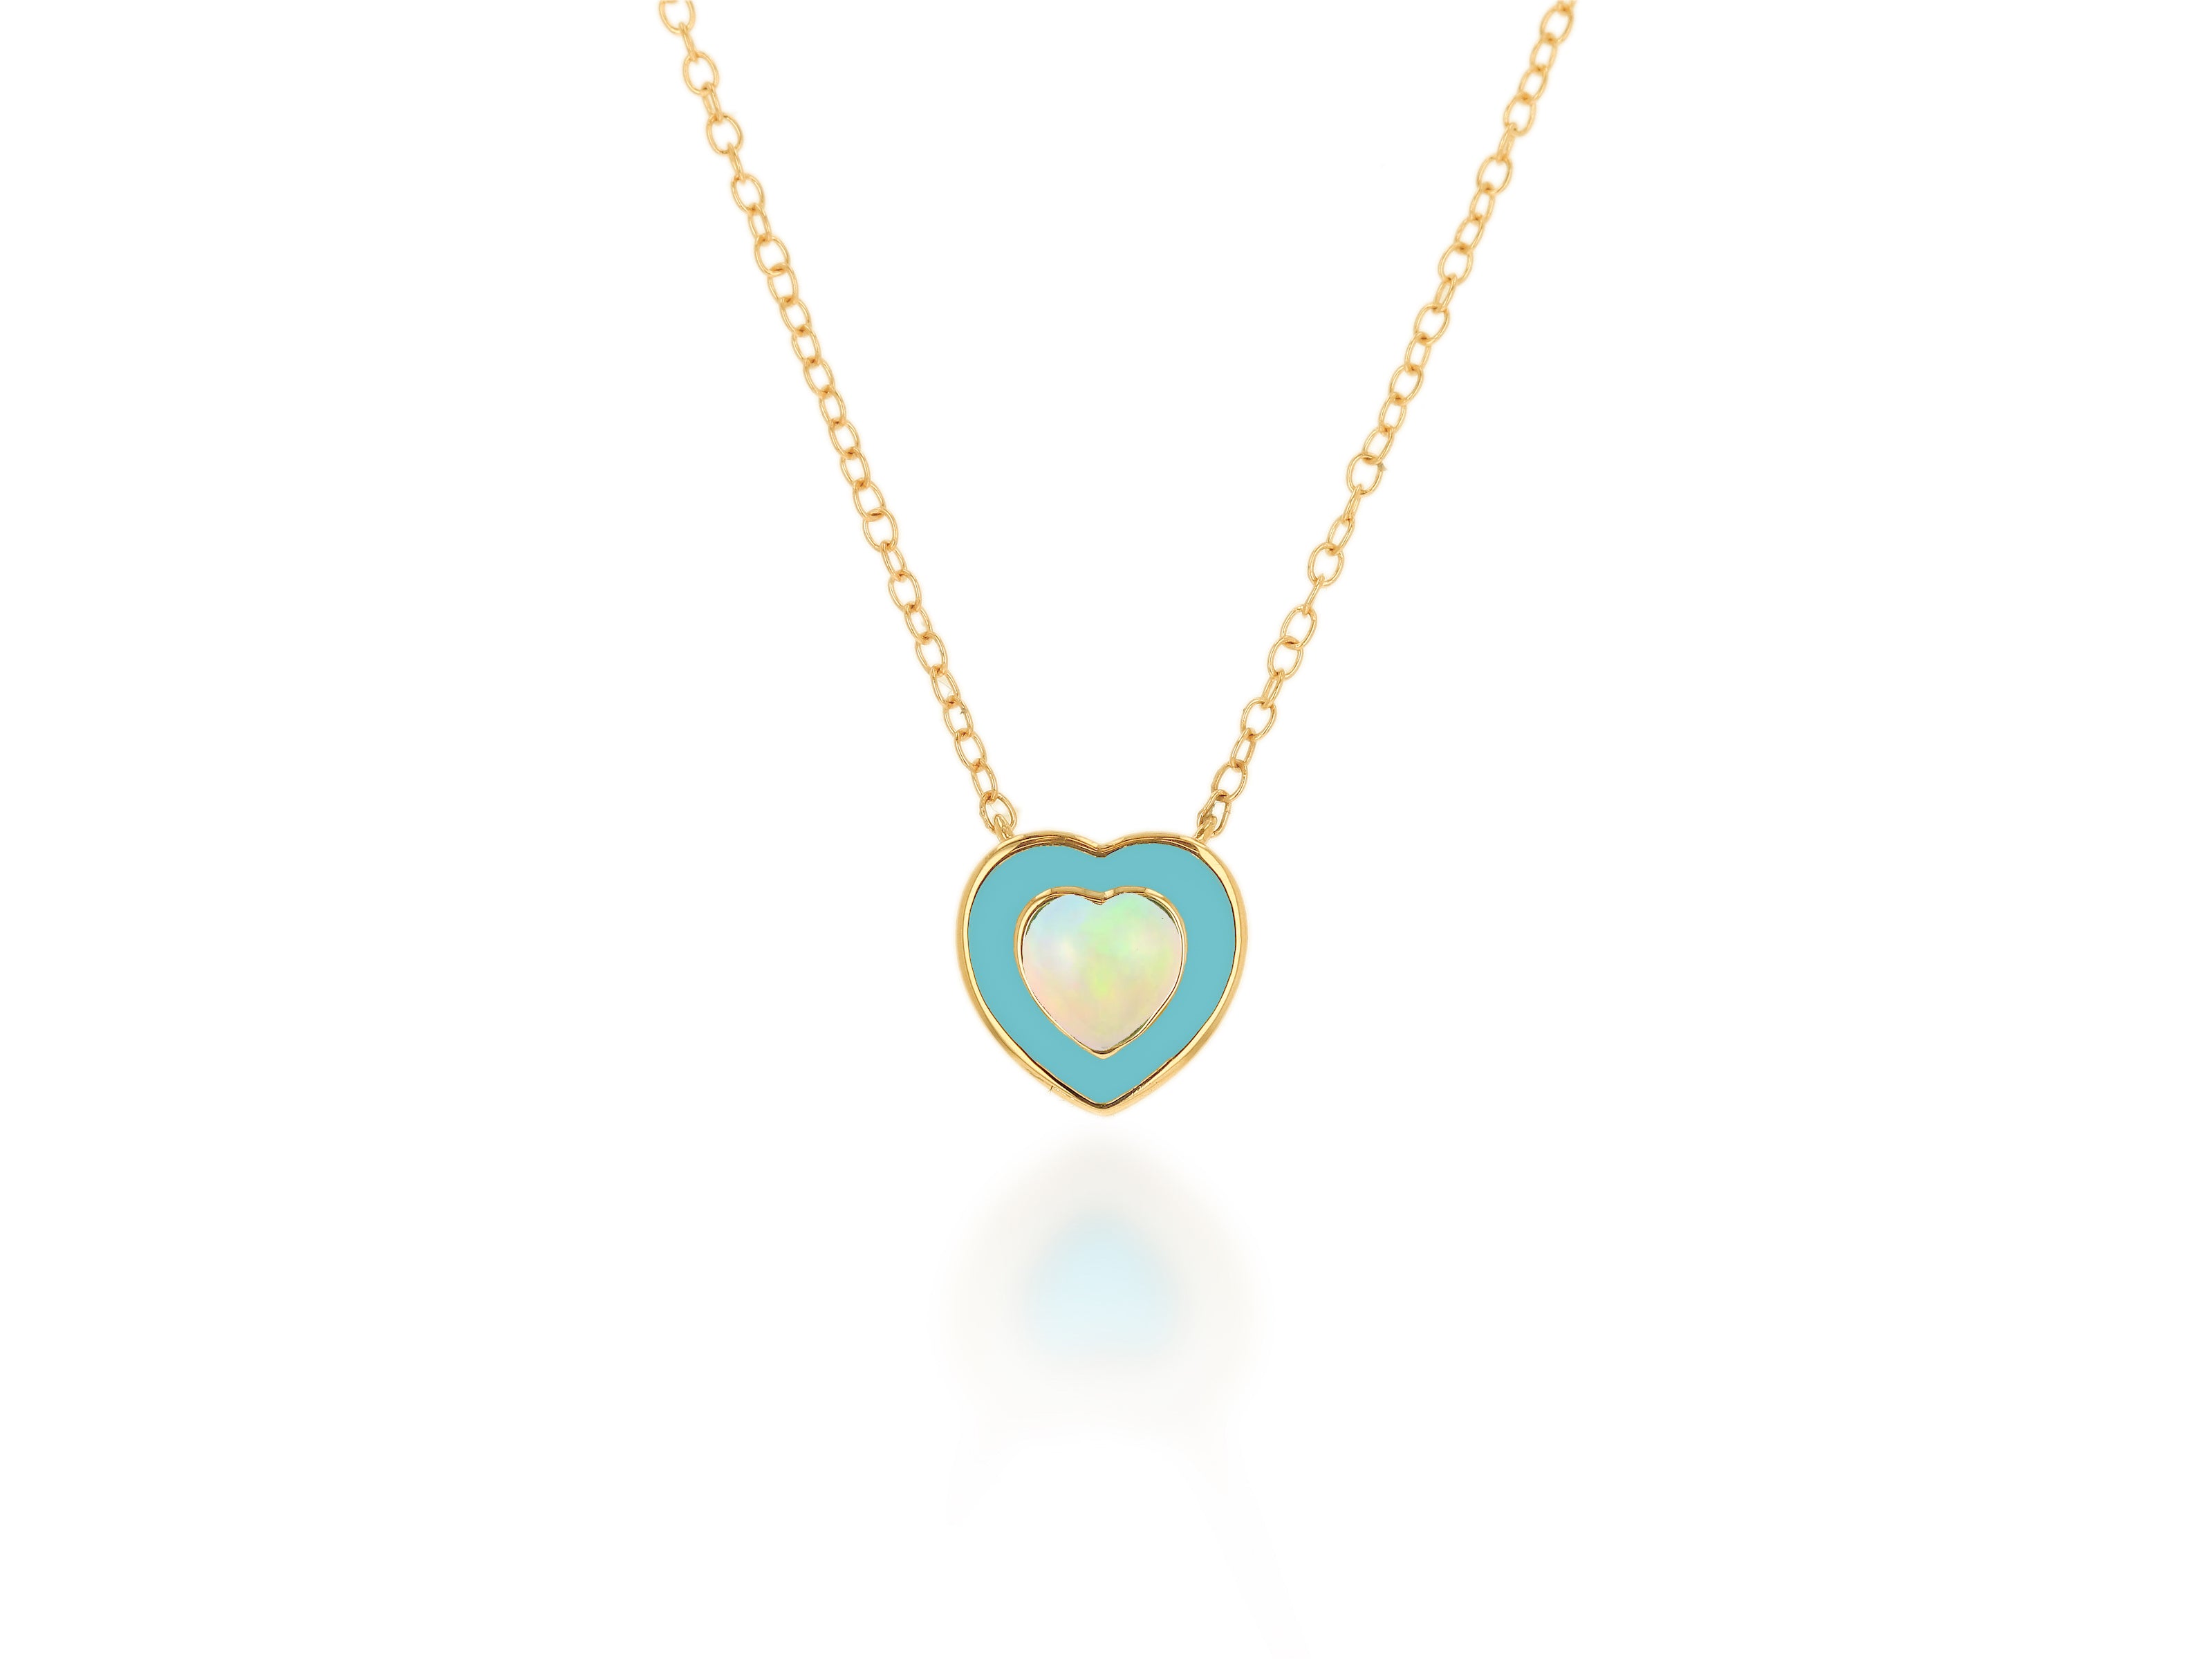 Teal Enamel and Opal Heart Necklace